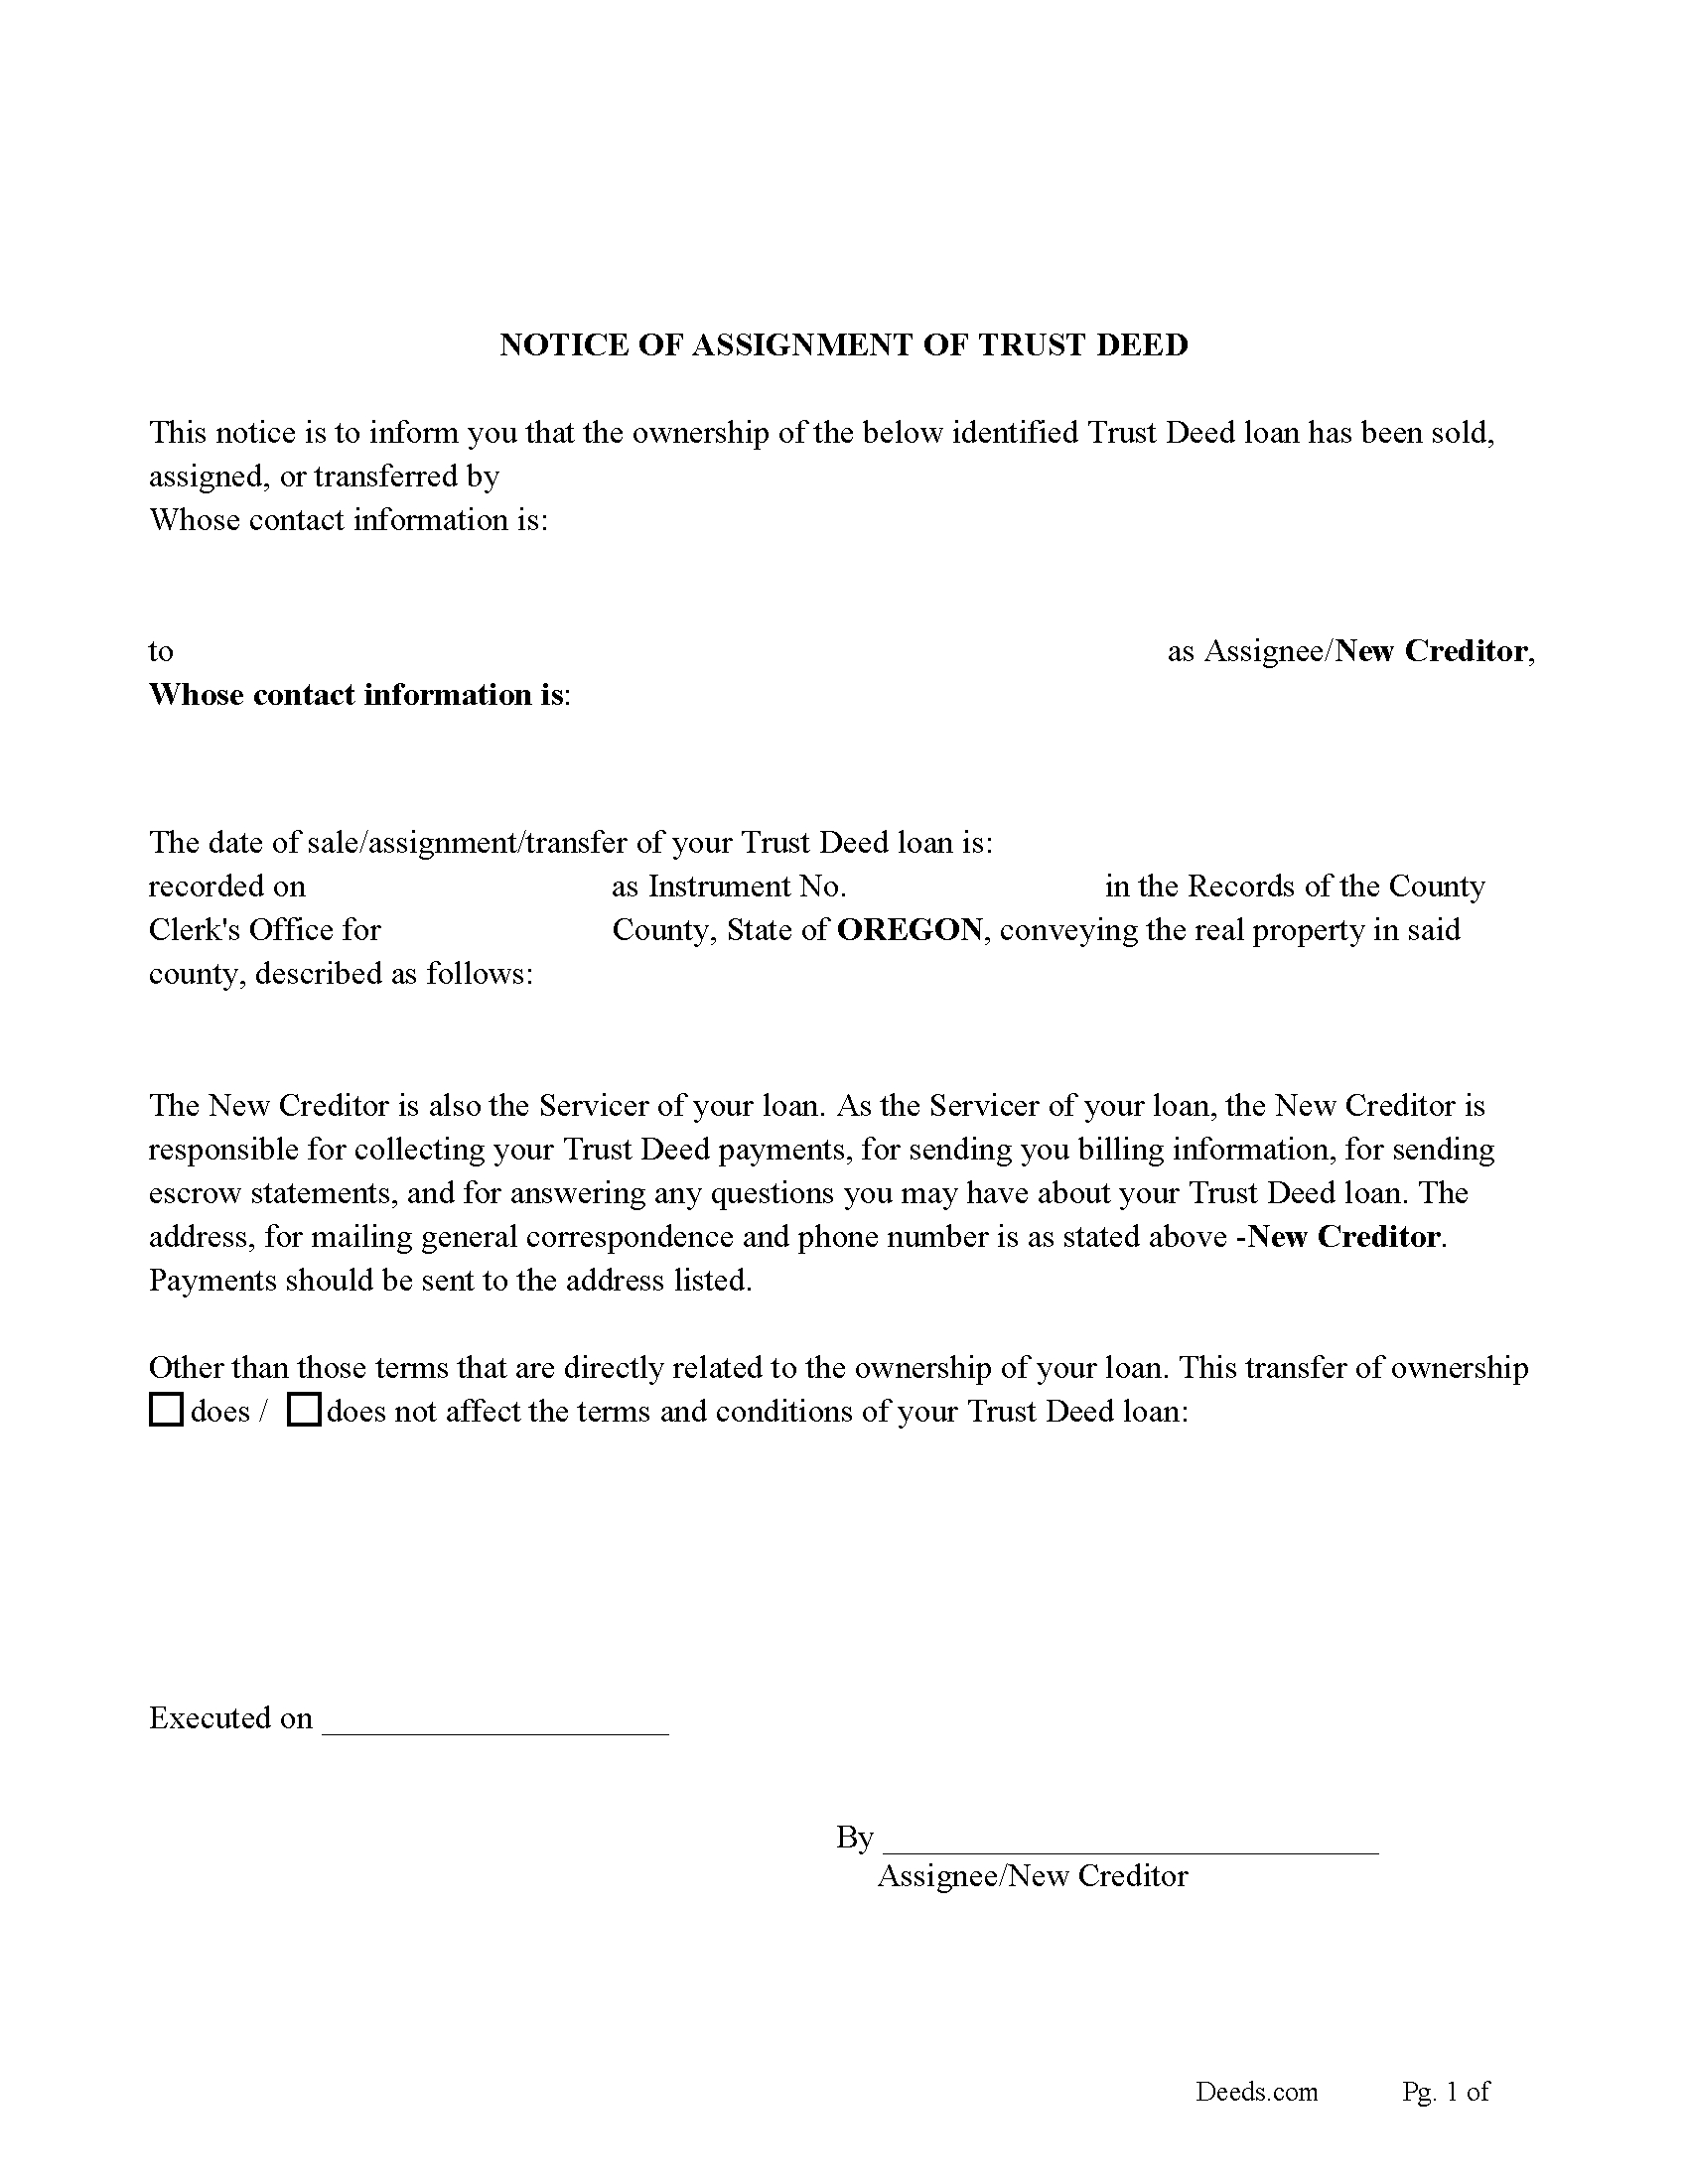 Notice of Assignment of Trust Deed Form